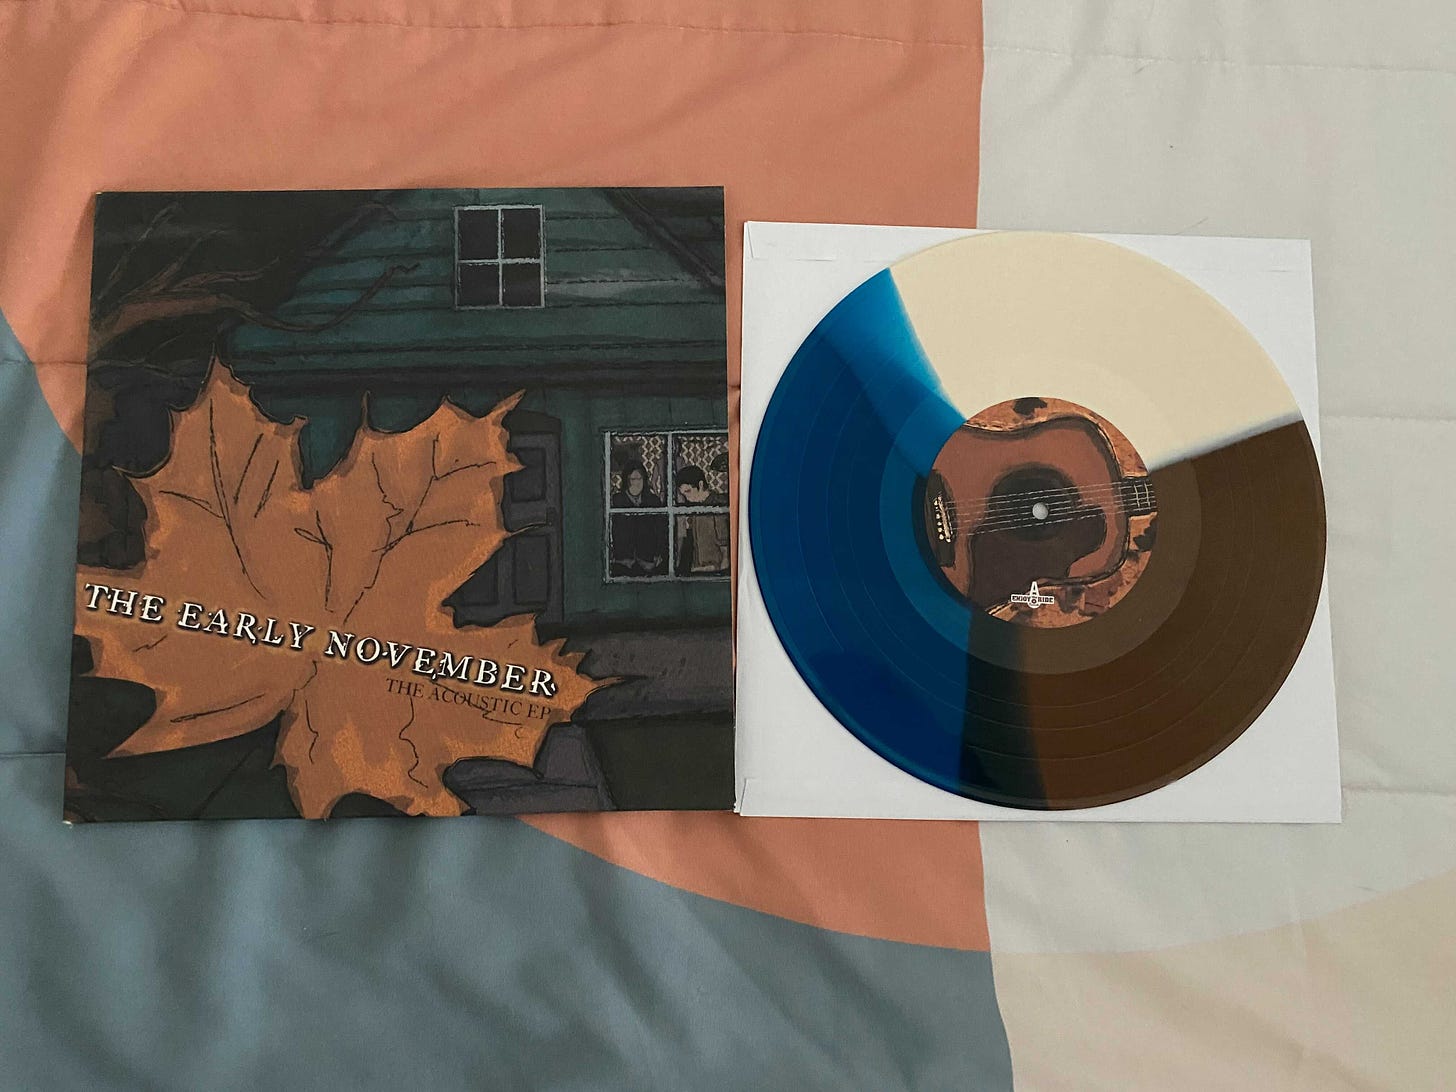 Vinyl copy of The Early November's acoustic ep